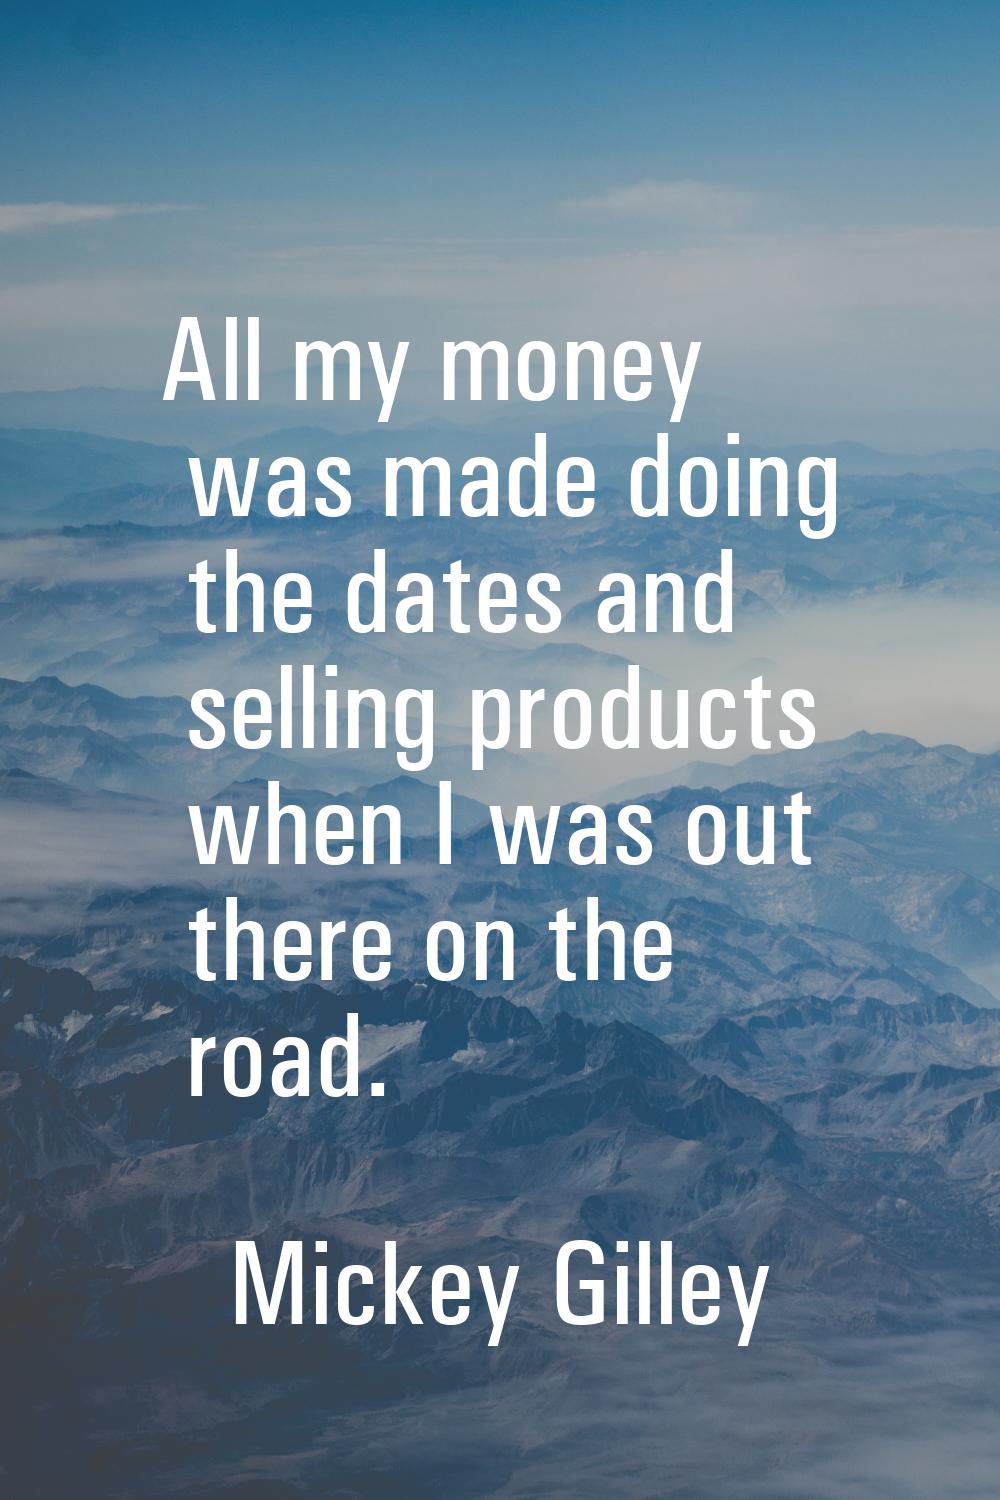 All my money was made doing the dates and selling products when I was out there on the road.